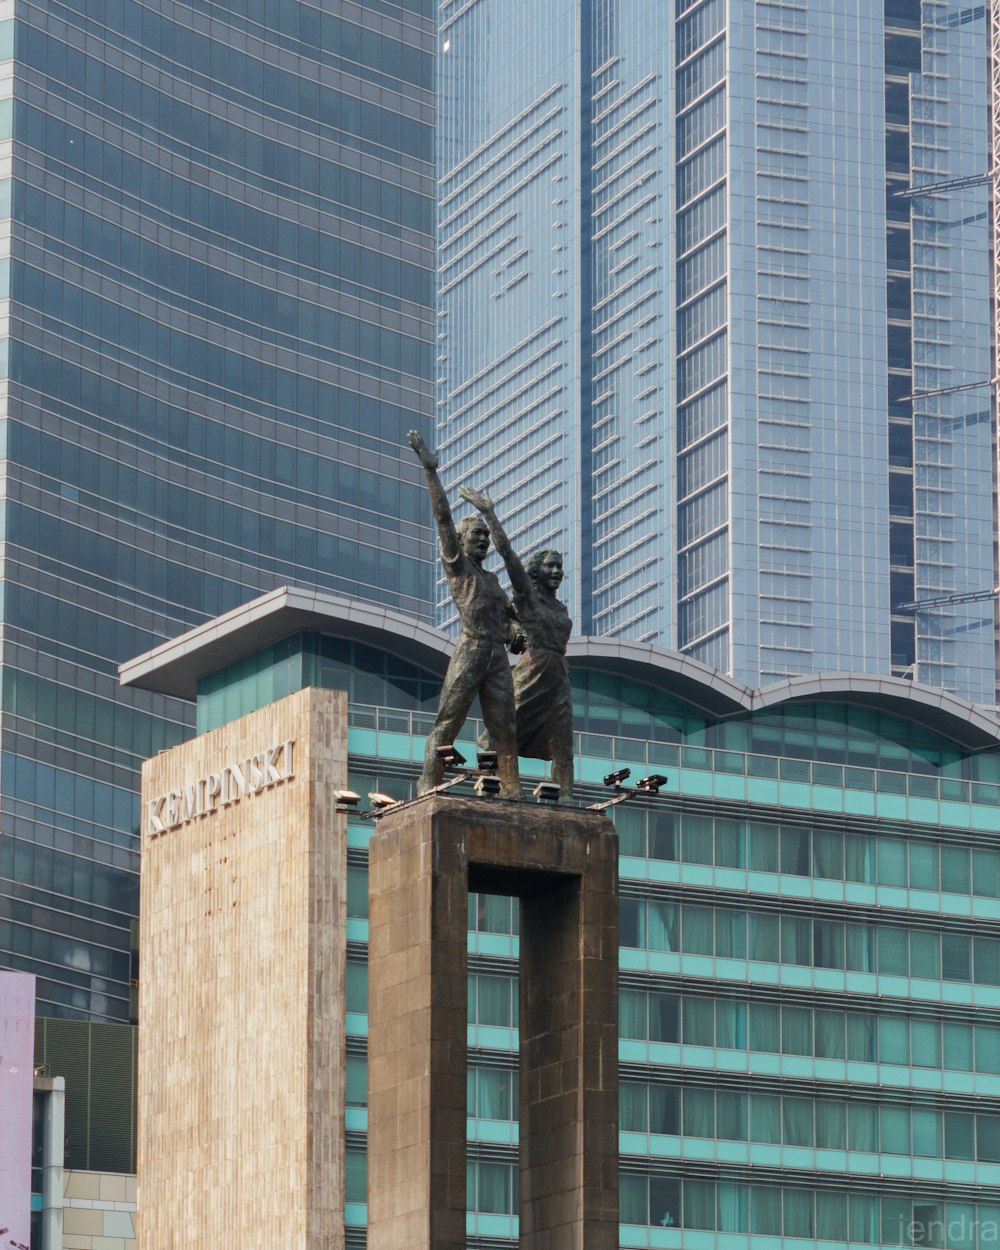 a statue of two men on a pedestal in front of tall buildings